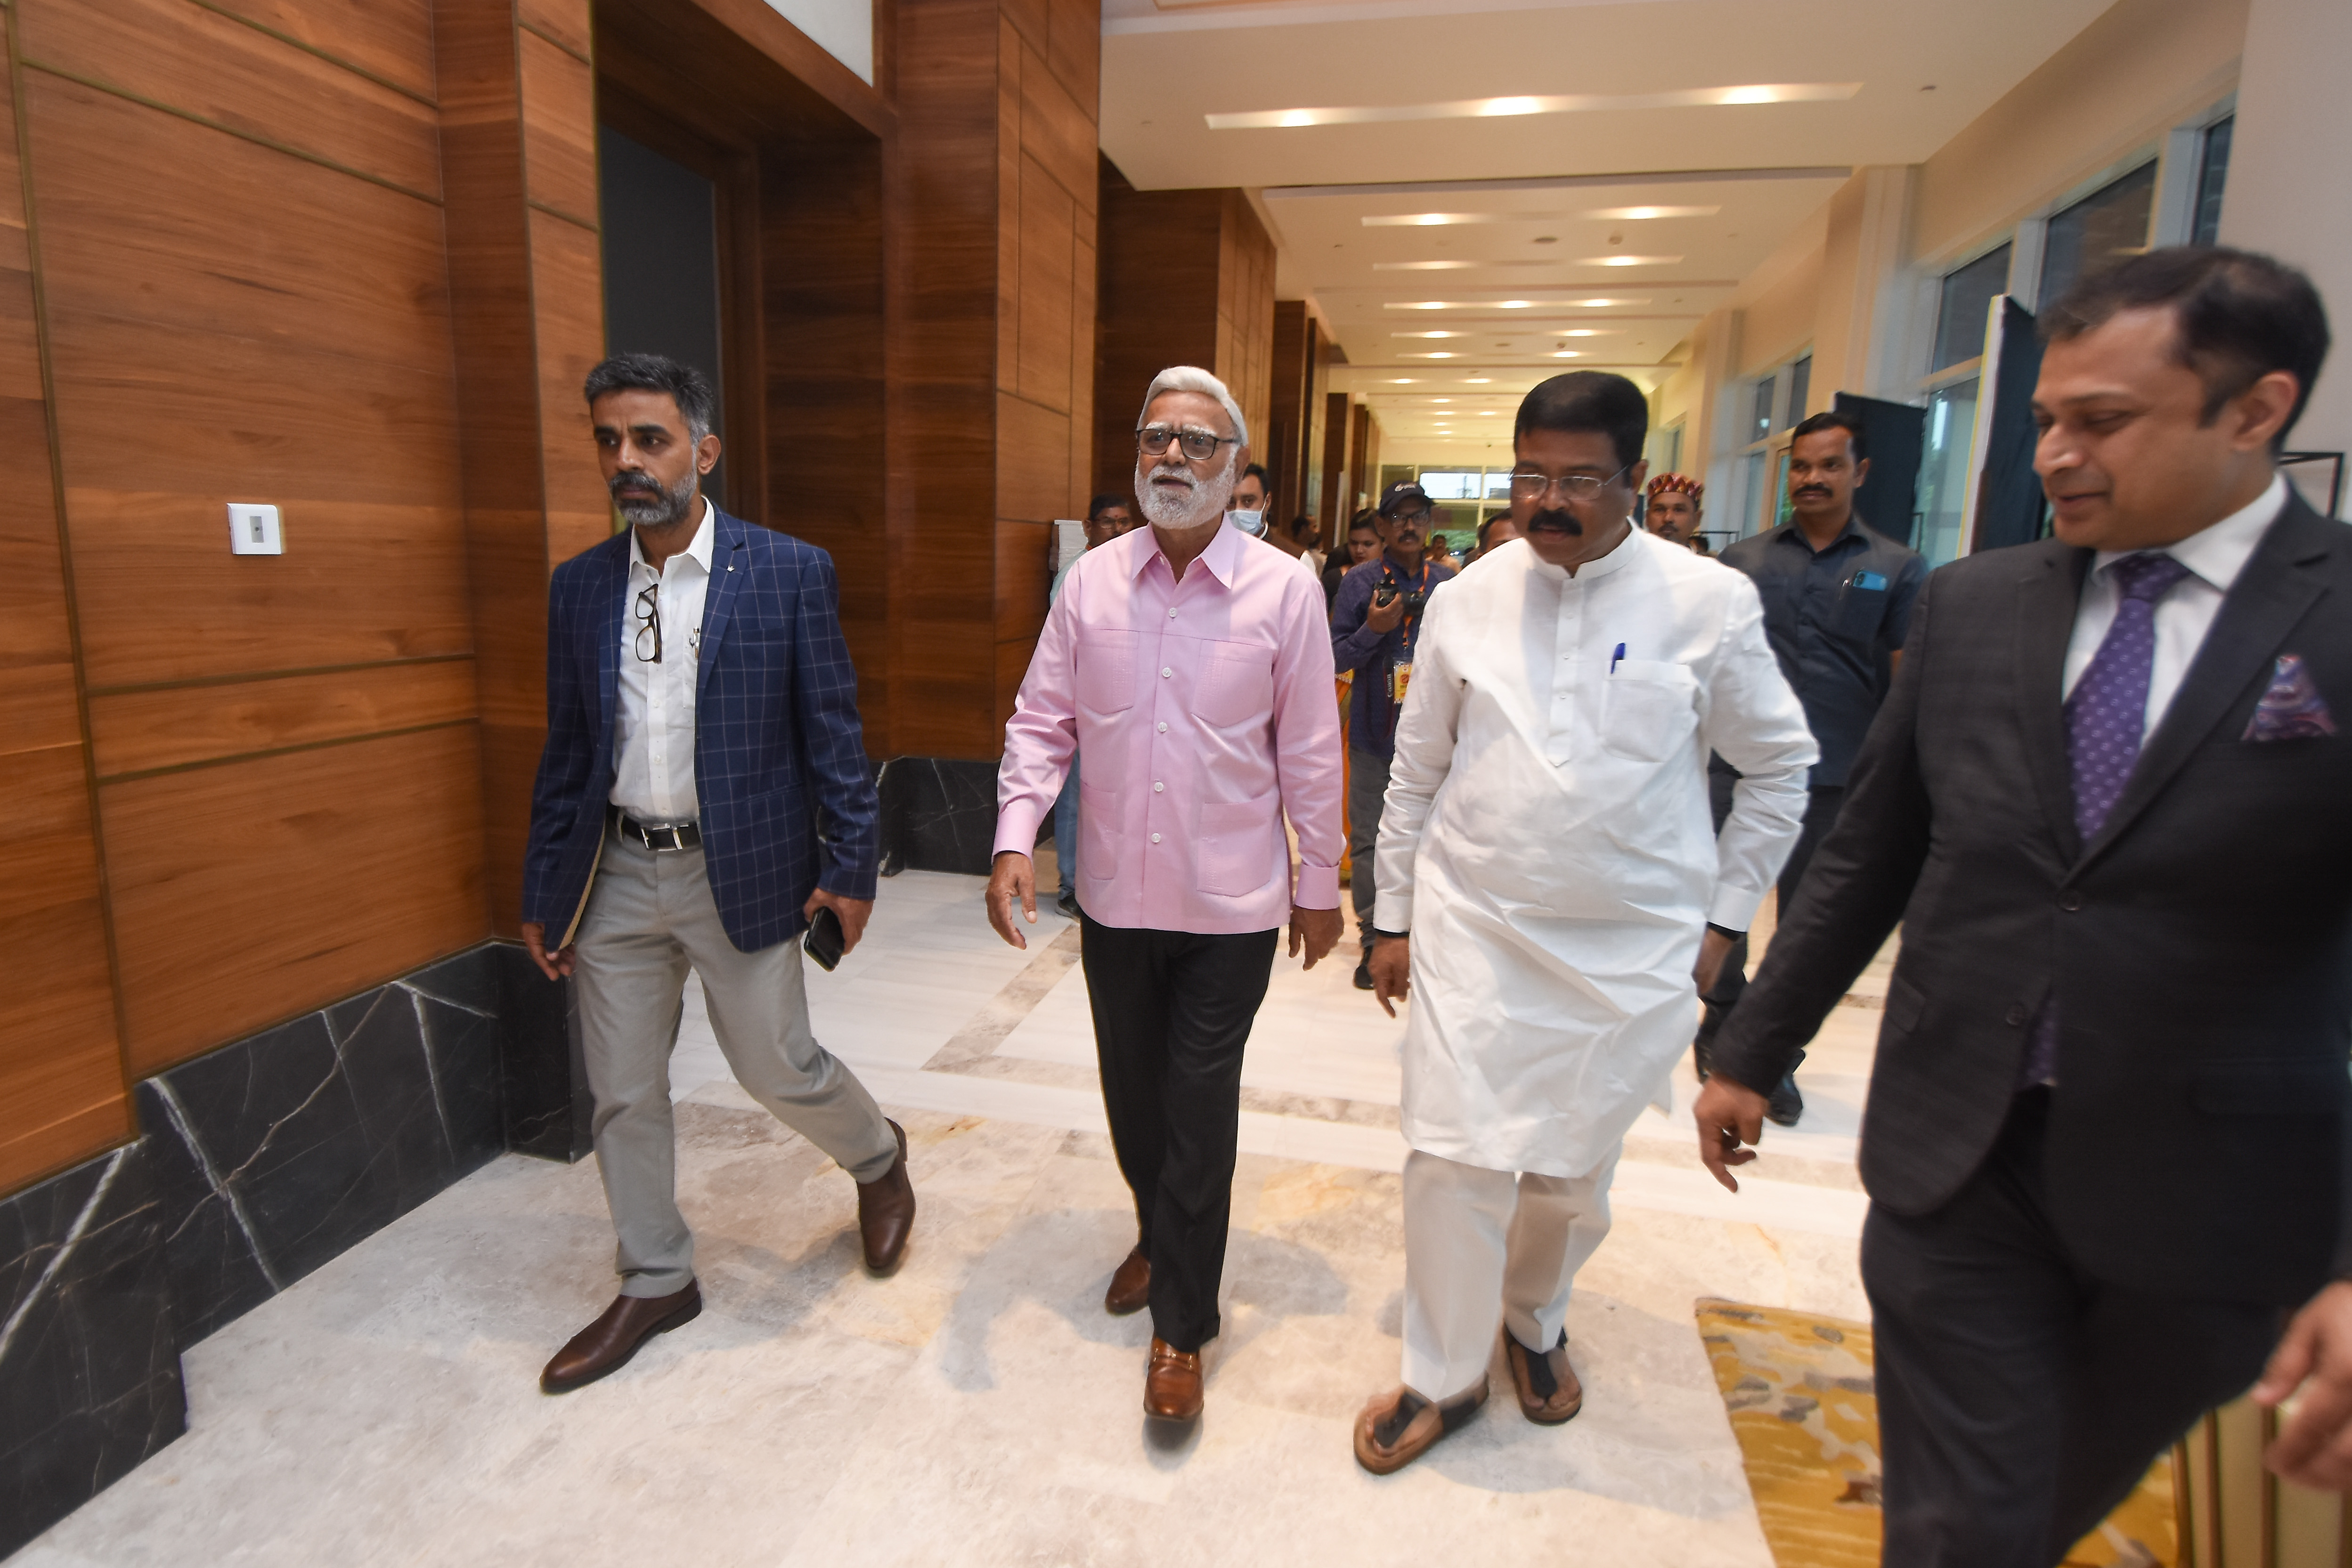 Union Minster Dharmendra Pradhan being welcome by TNIE Resident Editor Siba Mohanty and TNIE Editorial Director Pabhu Chawla on the first day Odisha Literay Festival in Bhubaneswar - Express / DEBADATTA MALLICK